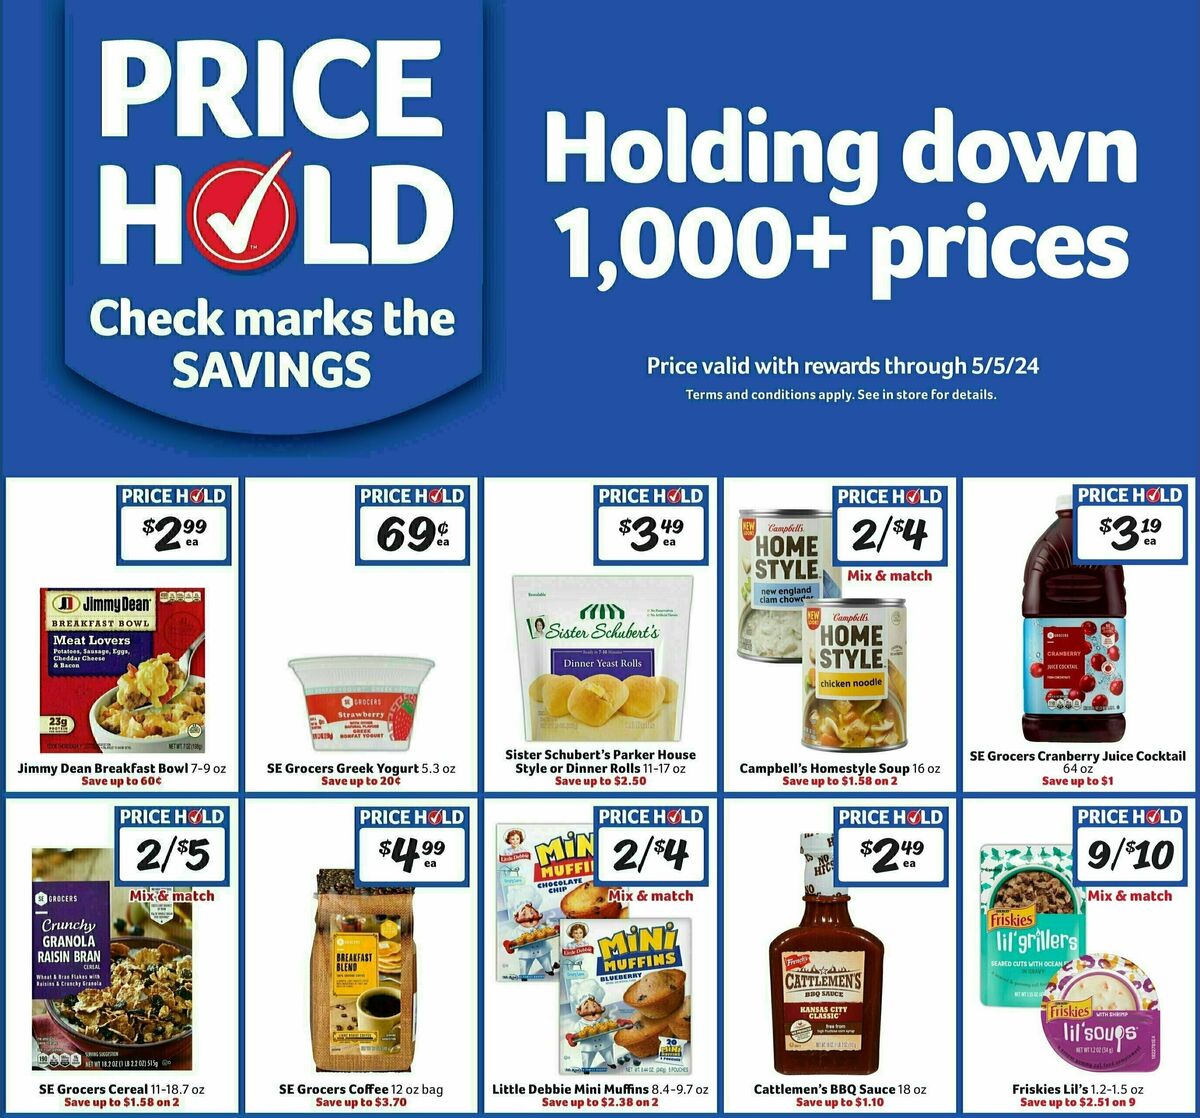 Winn-Dixie Weekly Ad from April 3